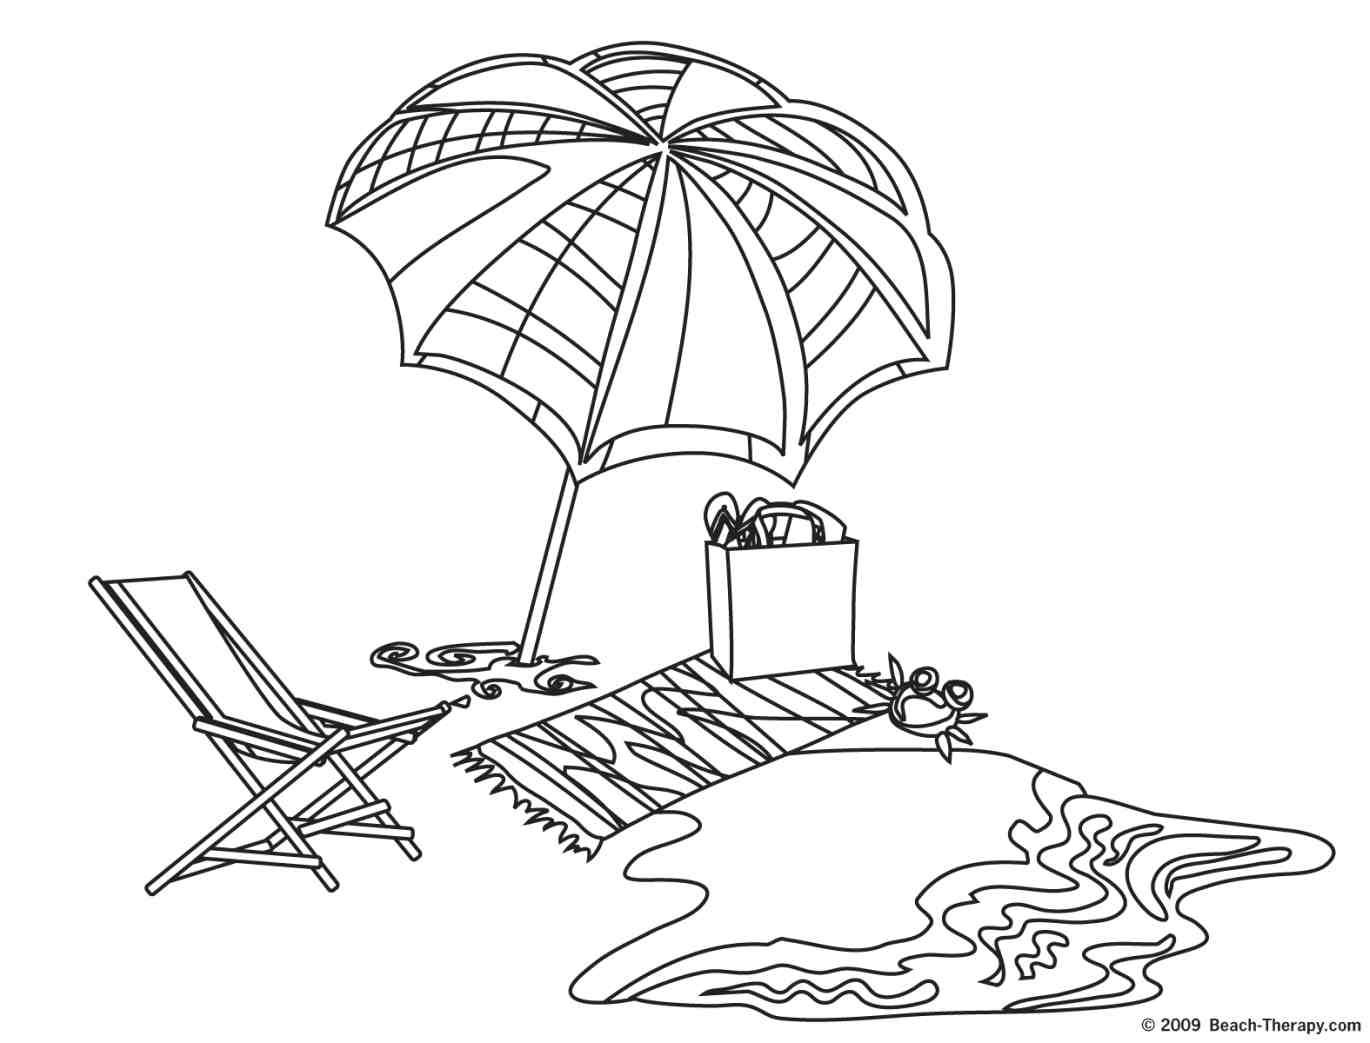 Palm Tree Beach Coloring Page - High Quality Coloring Pages